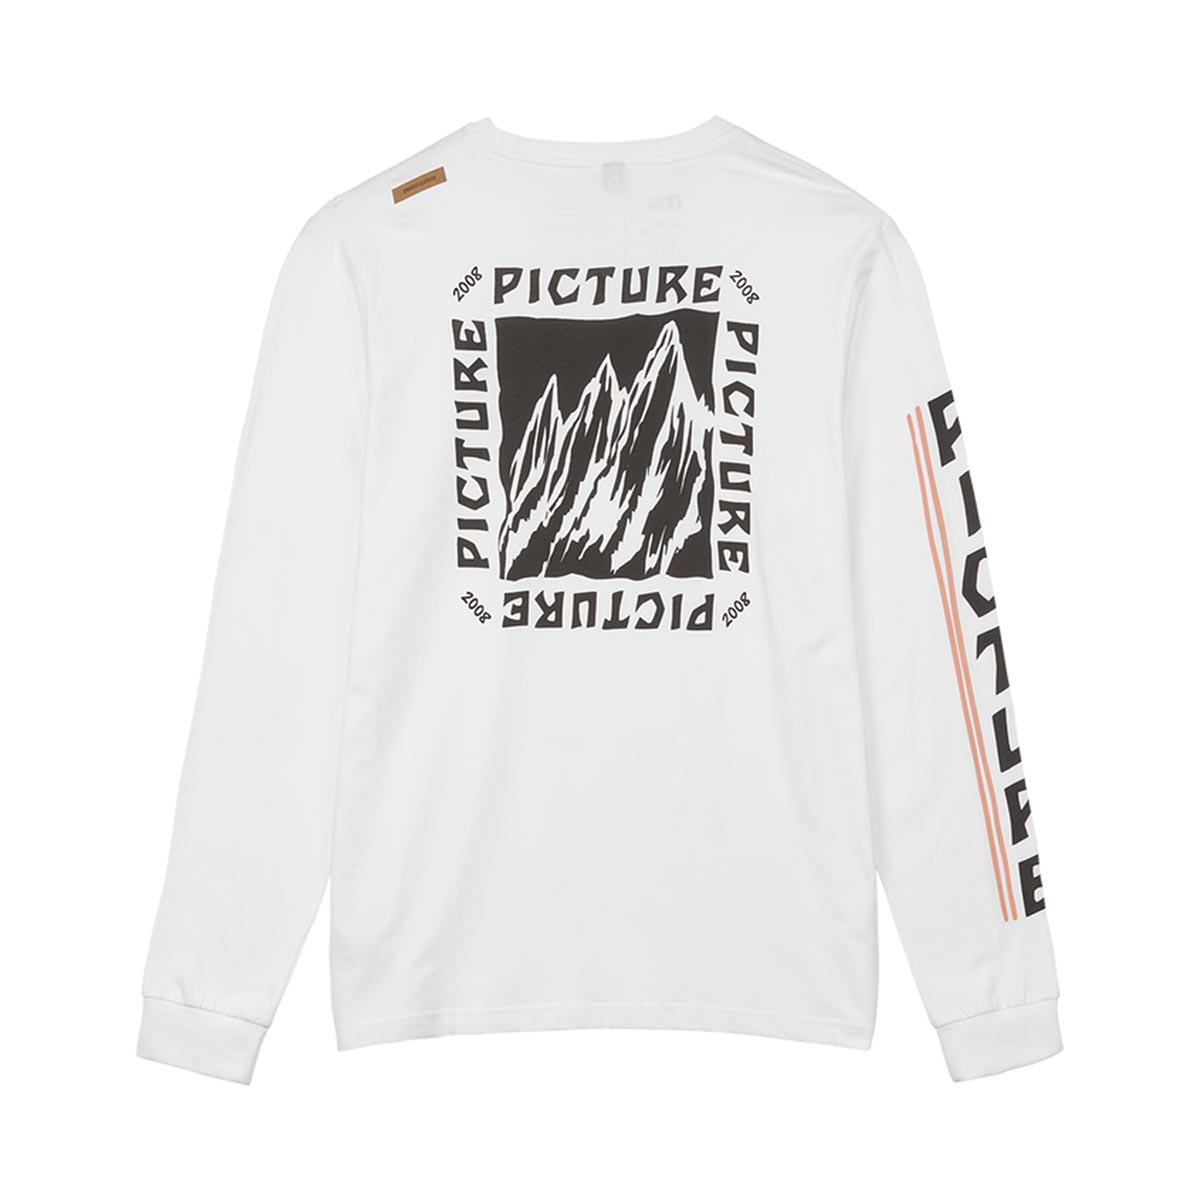 PICTURE - WWF LONG SLEEVE SHIRT